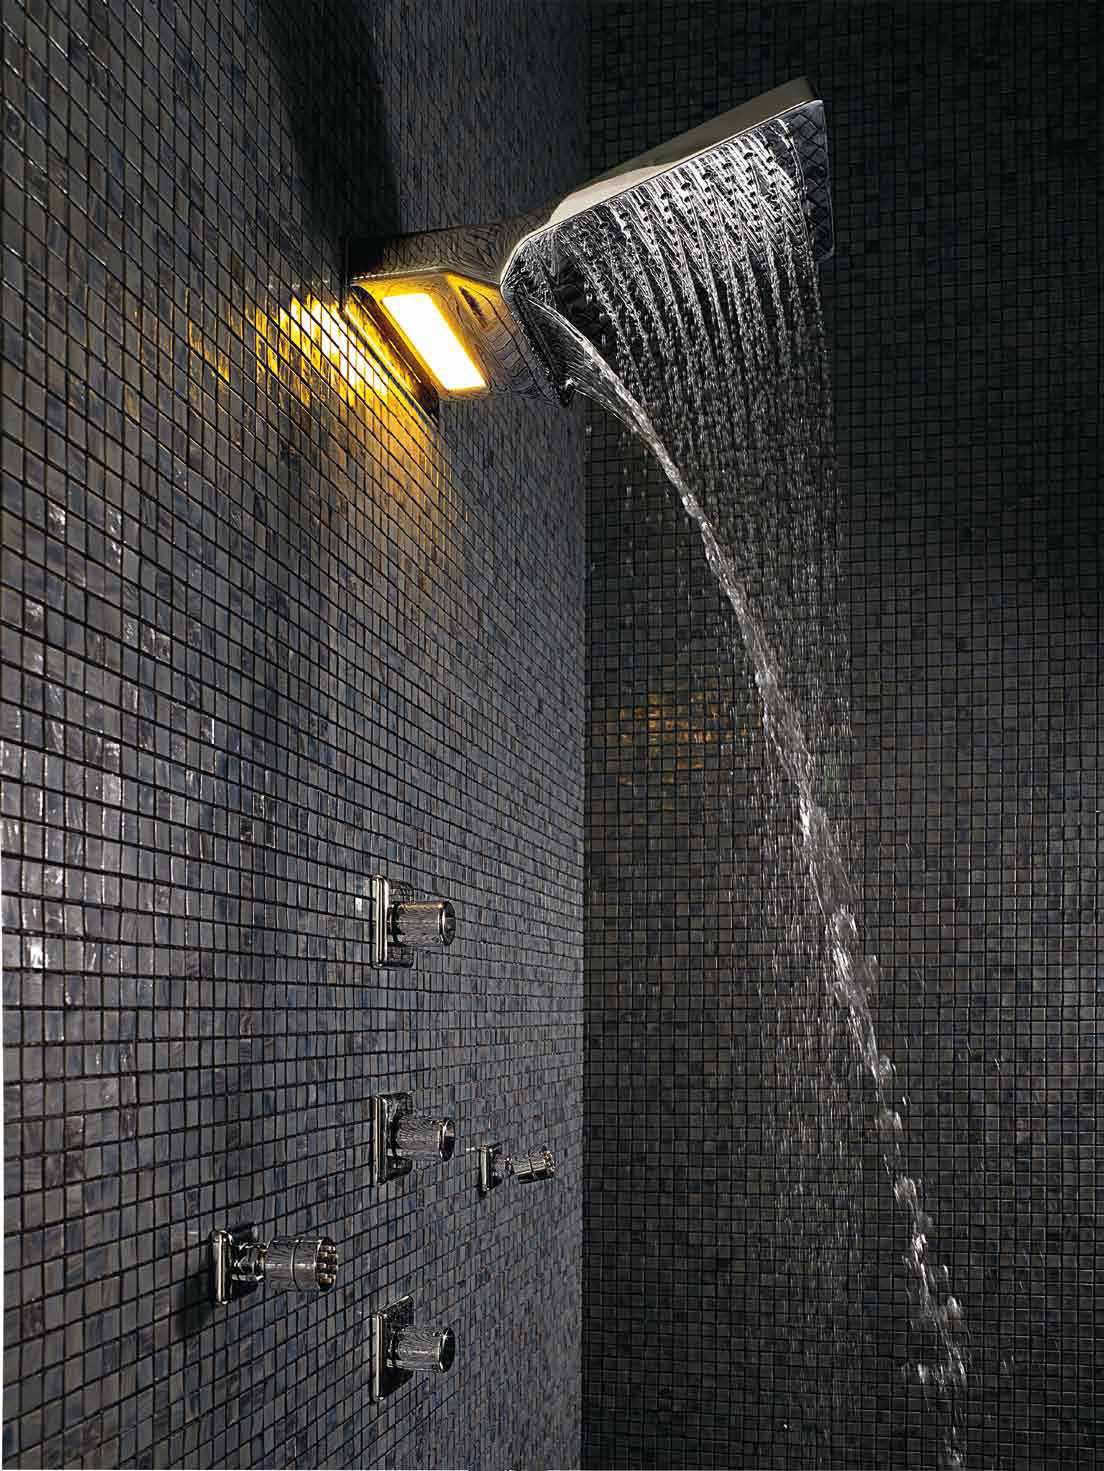 Wall mounted showerhead with rain/ blade jets and light.